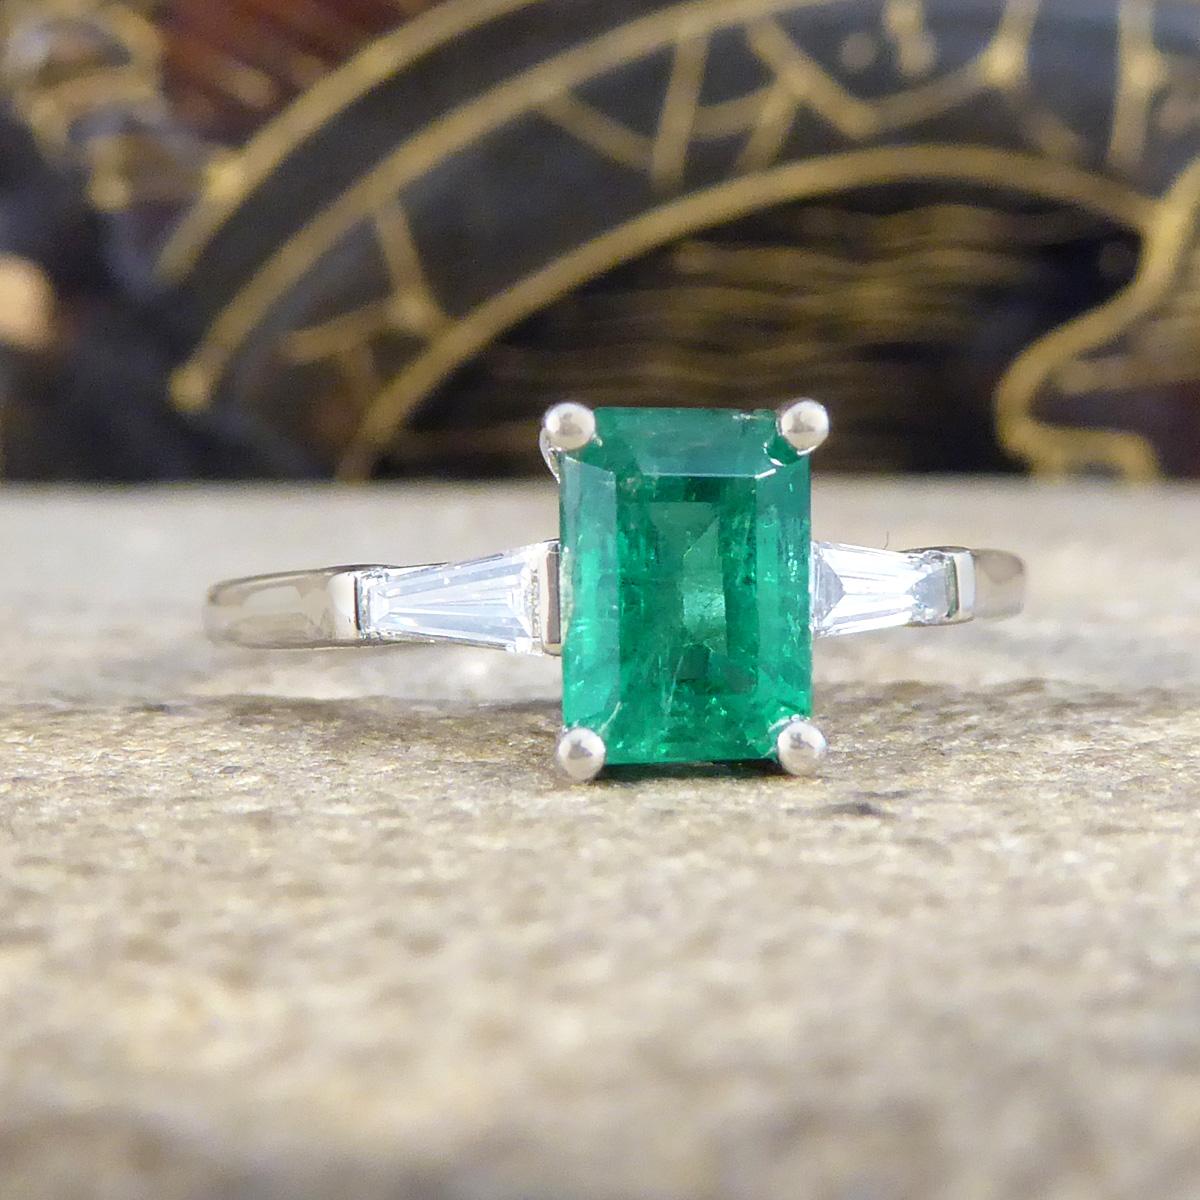 This ring features and holds a very mesmerising green Emerald in the centre. The Emerald itself is in great condition with sharp facets, it has such a vibrant green colour to it with regular natural Emerald flaws within the stone. Accompanying the